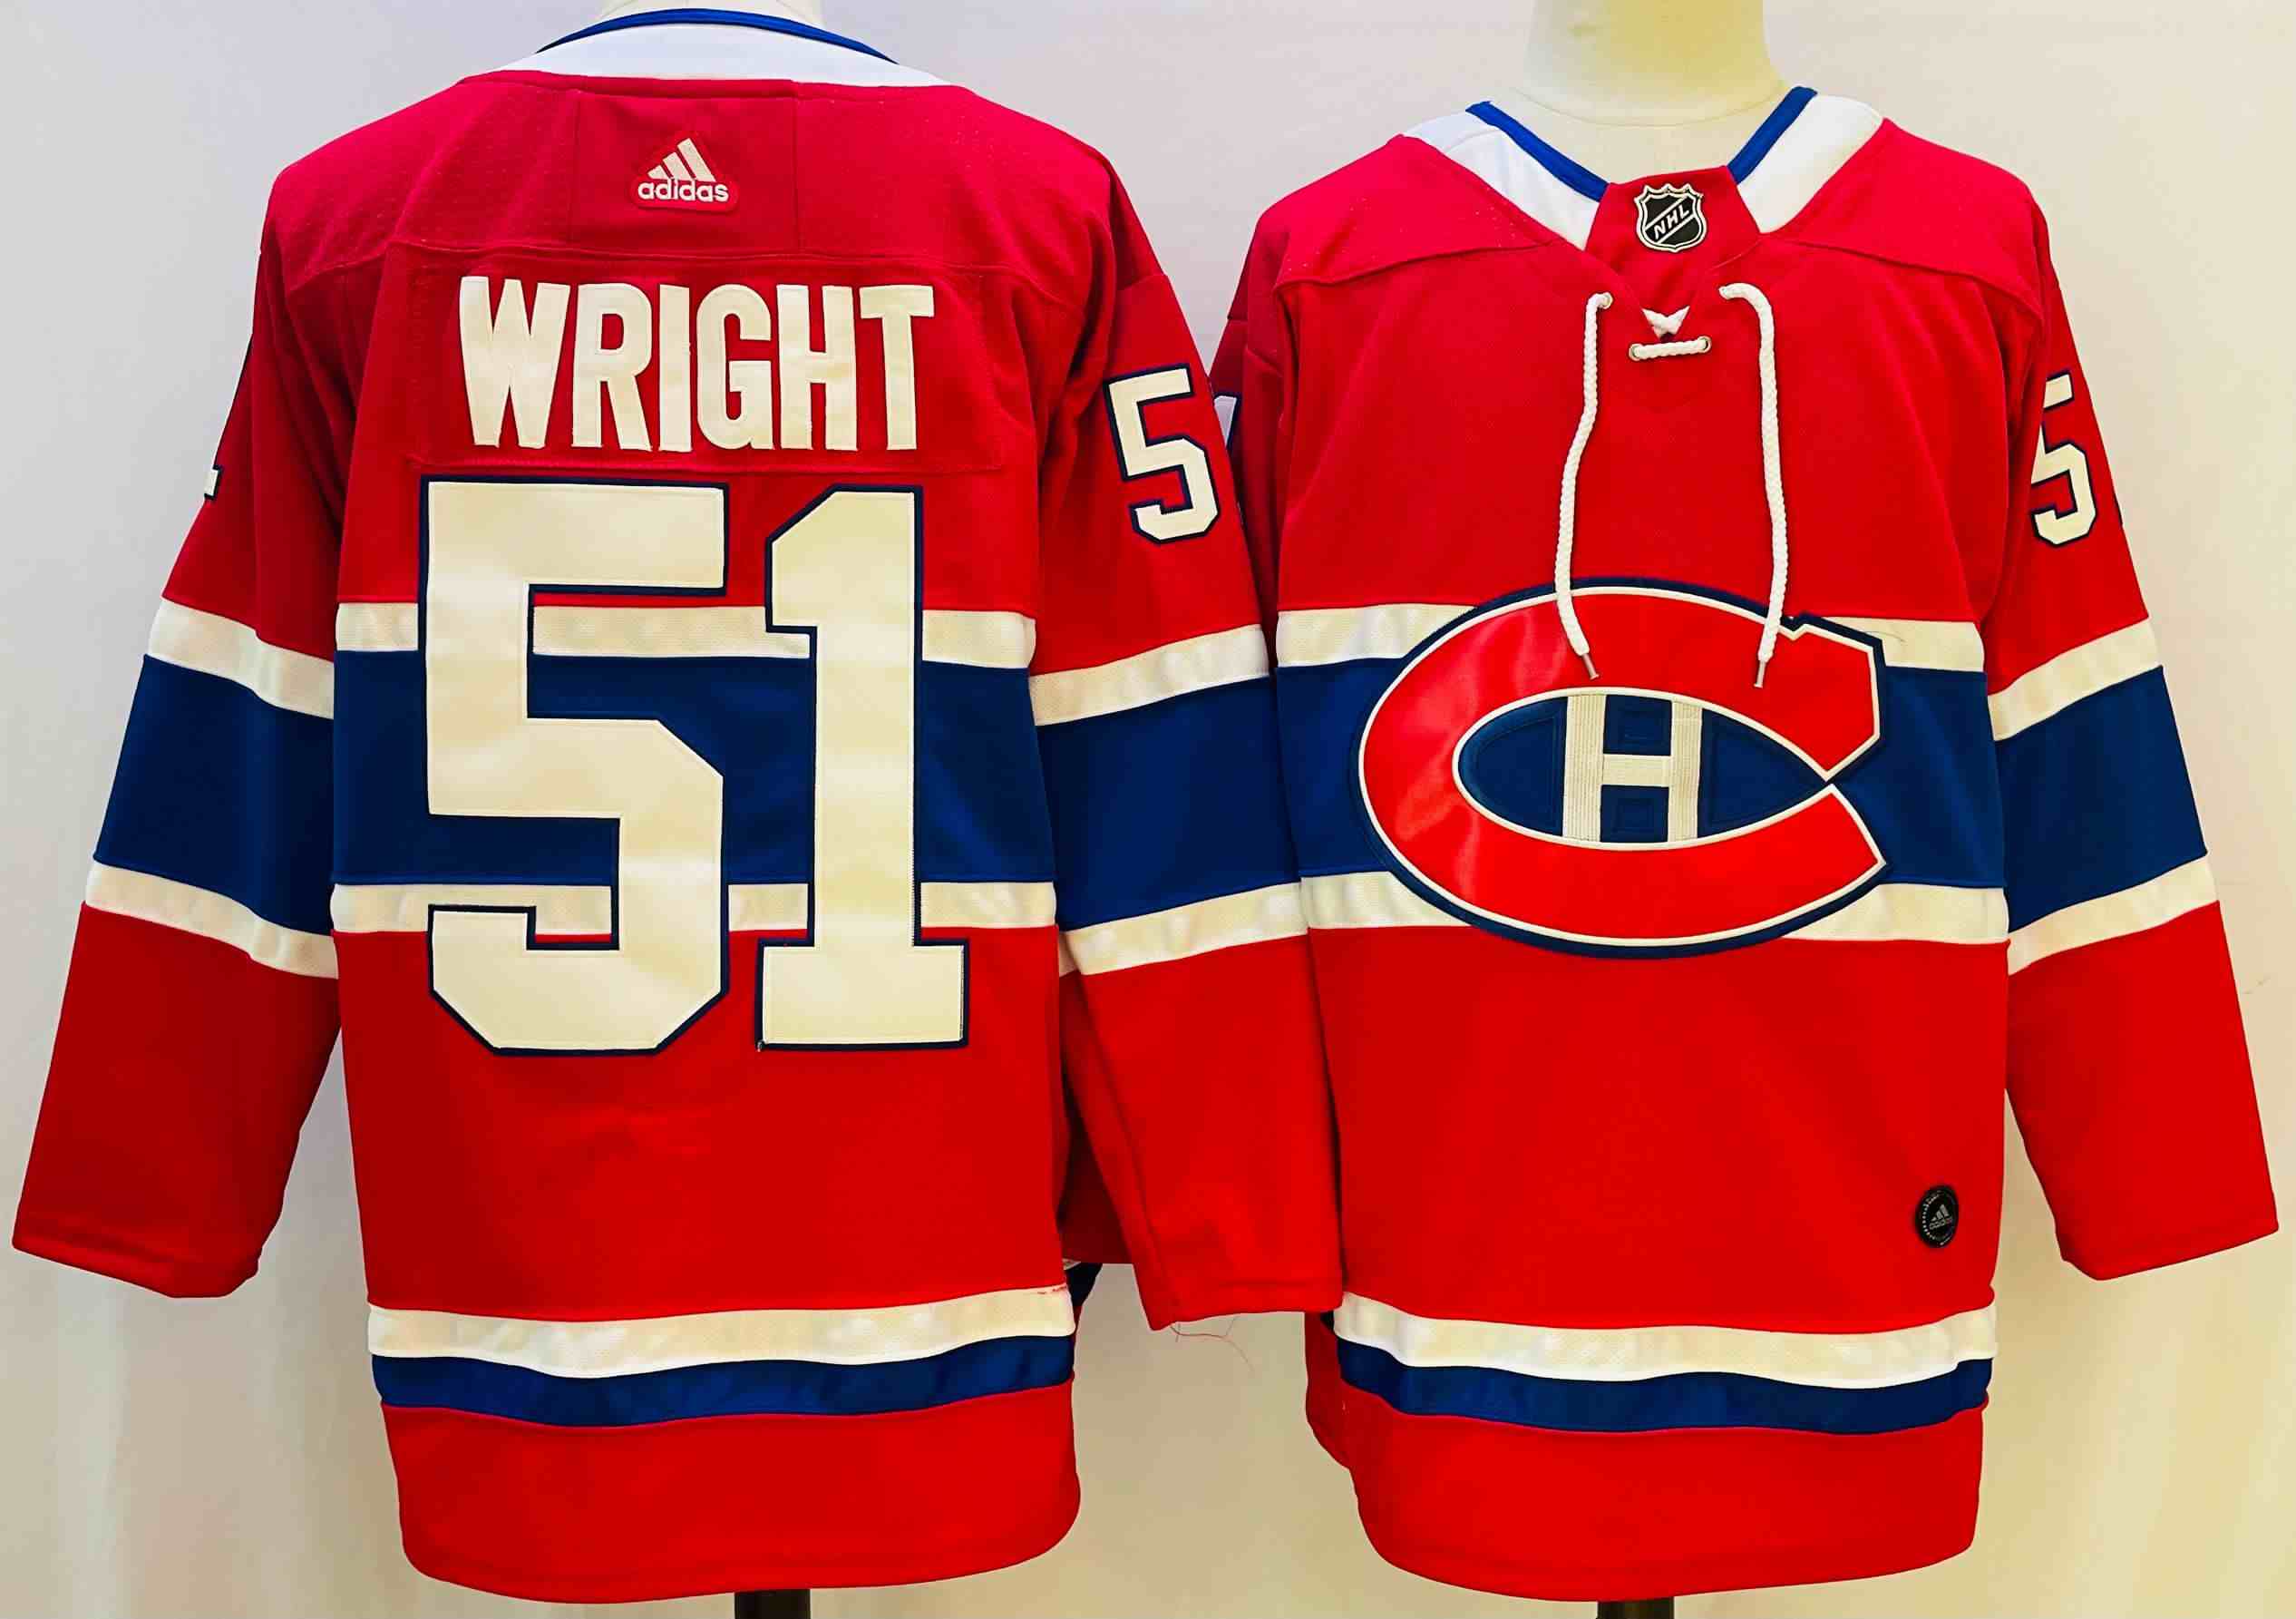 Men's Montreal Canadiens #51 WRIGHT  Red Stitched Jersey